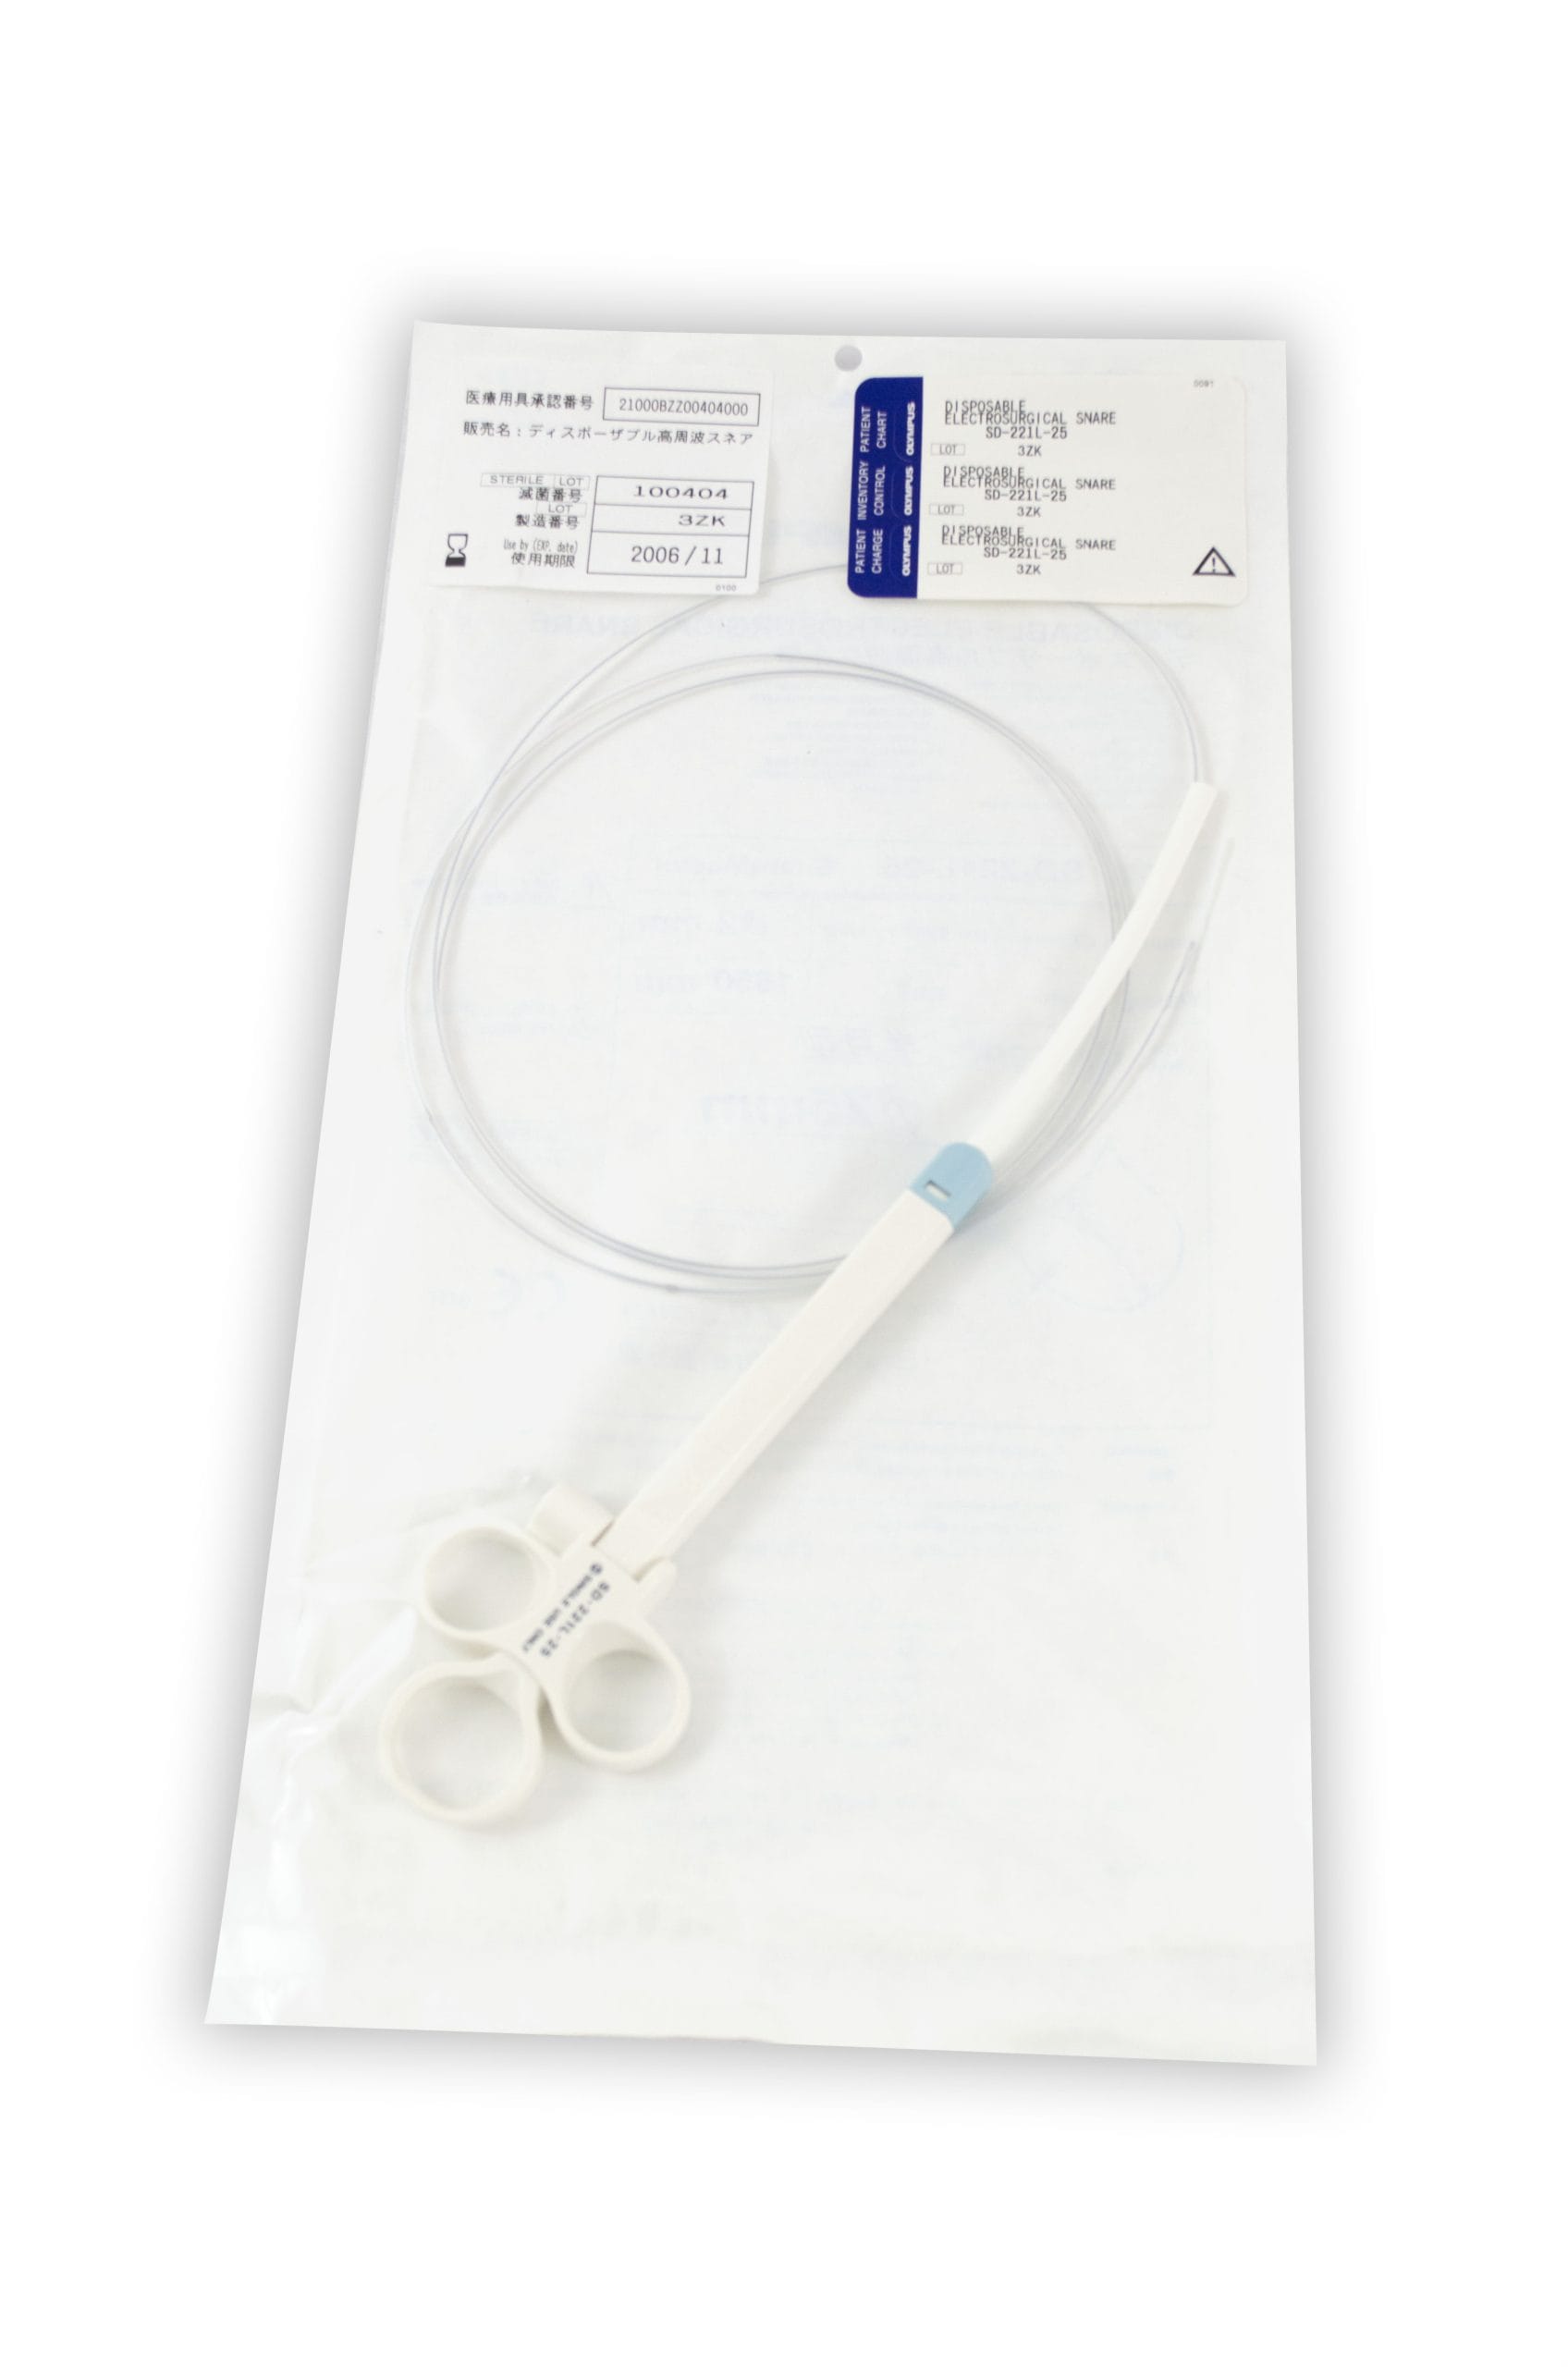 [Out-of-Date] Olympus DIsposable Diathermy Snare - SD-221L-25